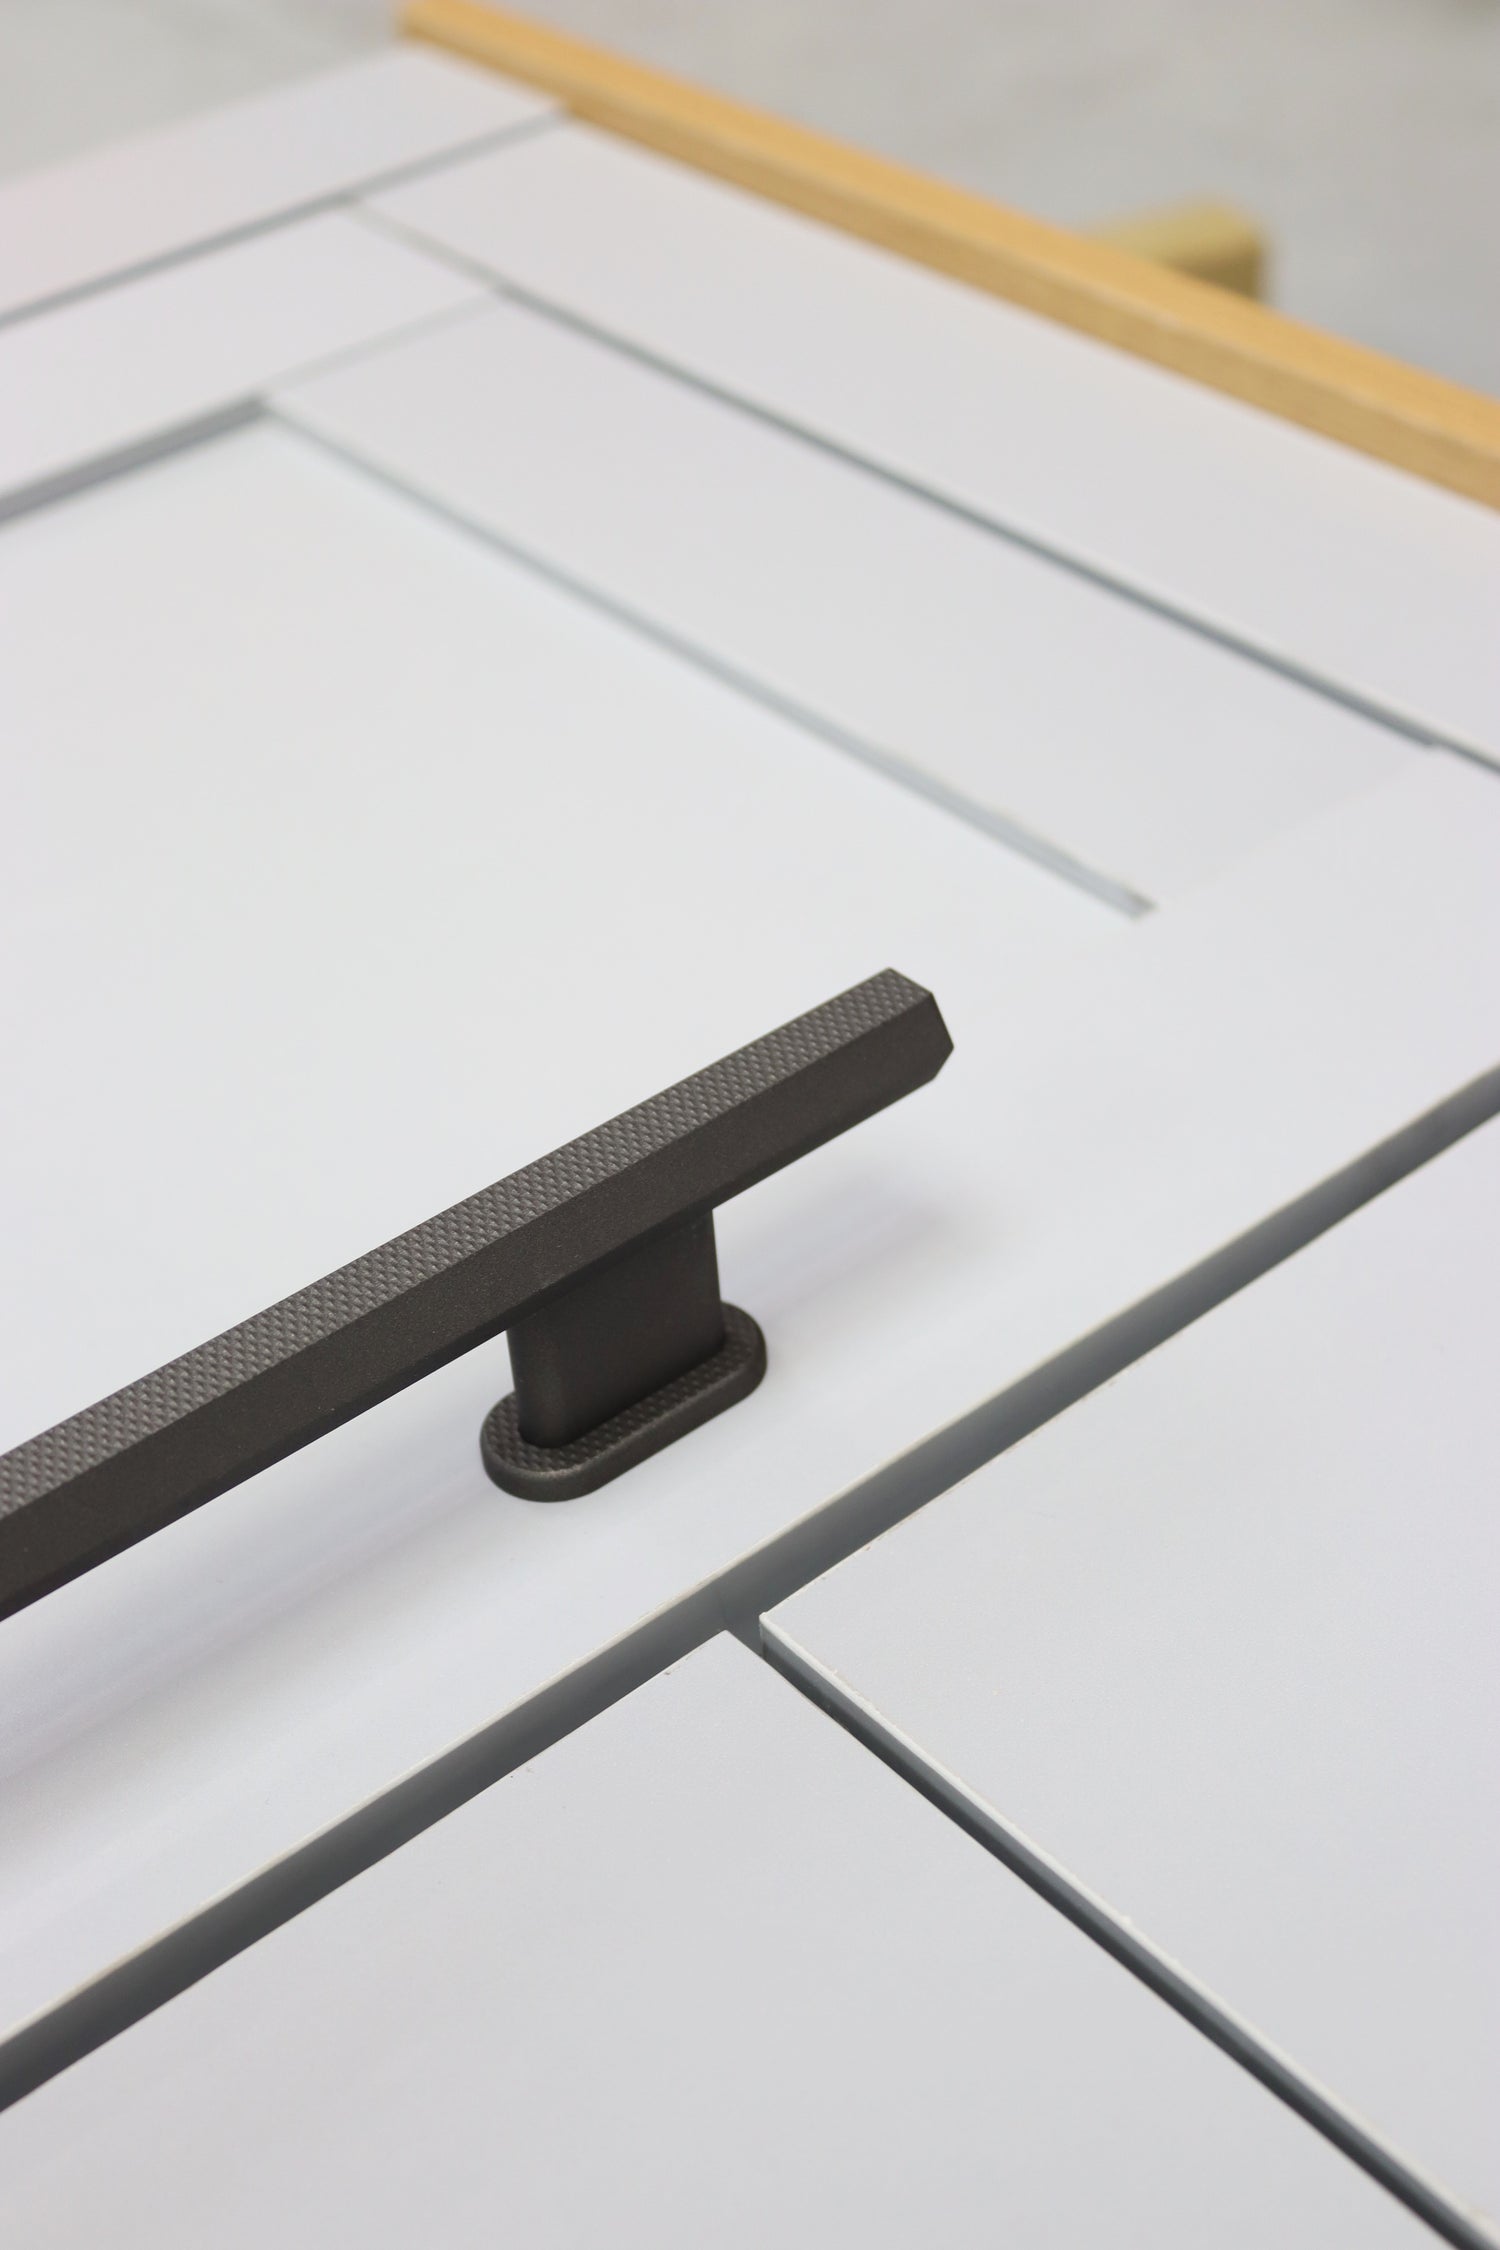 sennen hex pull bar cabinetry handle in cerakote ceramic tungsten for wardrobes and kitchen appliances - georgie commons freelance photography